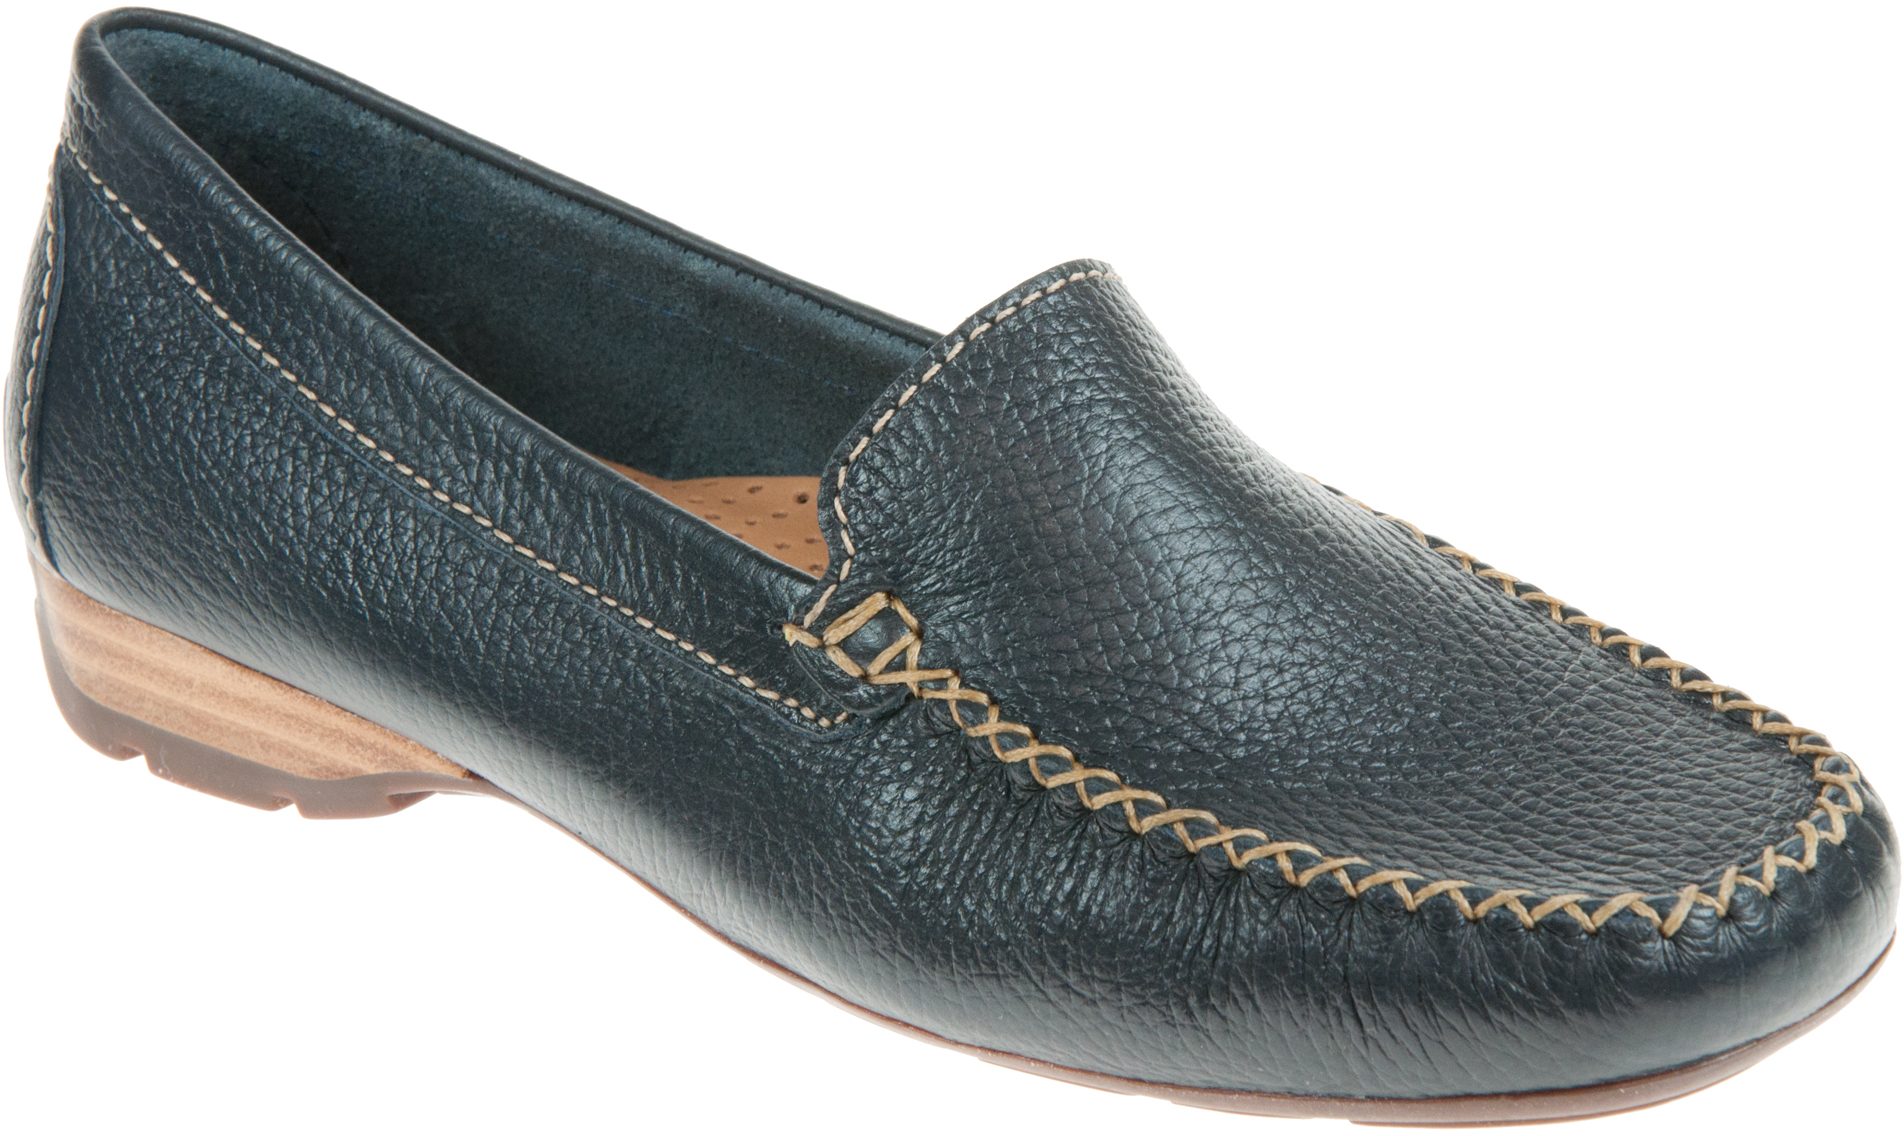 Van Dal Sanson Navy Leather 2156 4001 - Everyday Shoes - Humphries Shoes